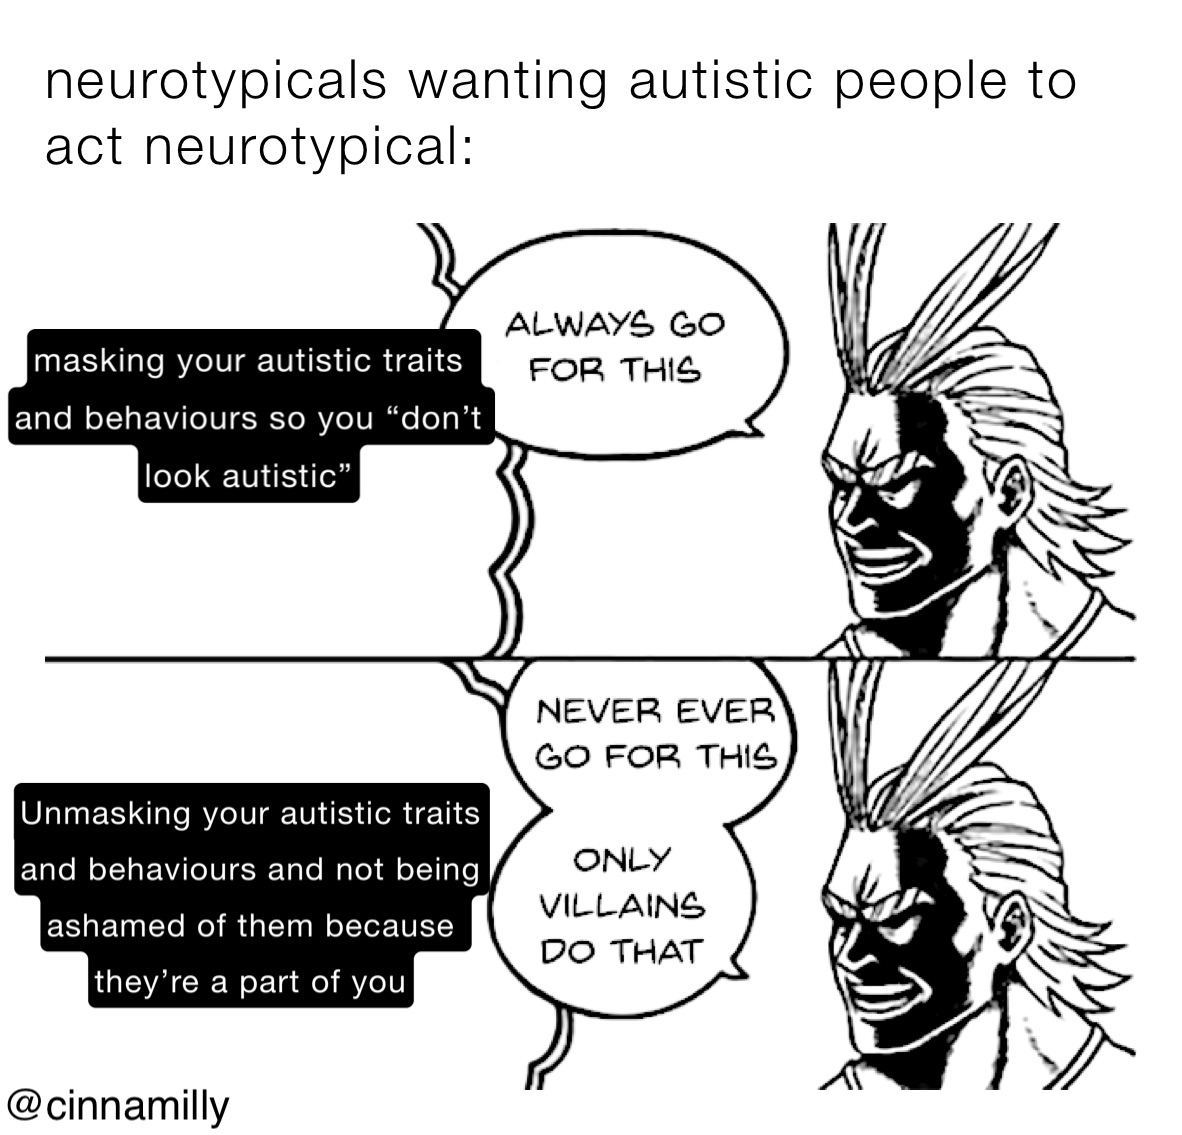 neurotypicals wanting autistic people to act neurotypical: